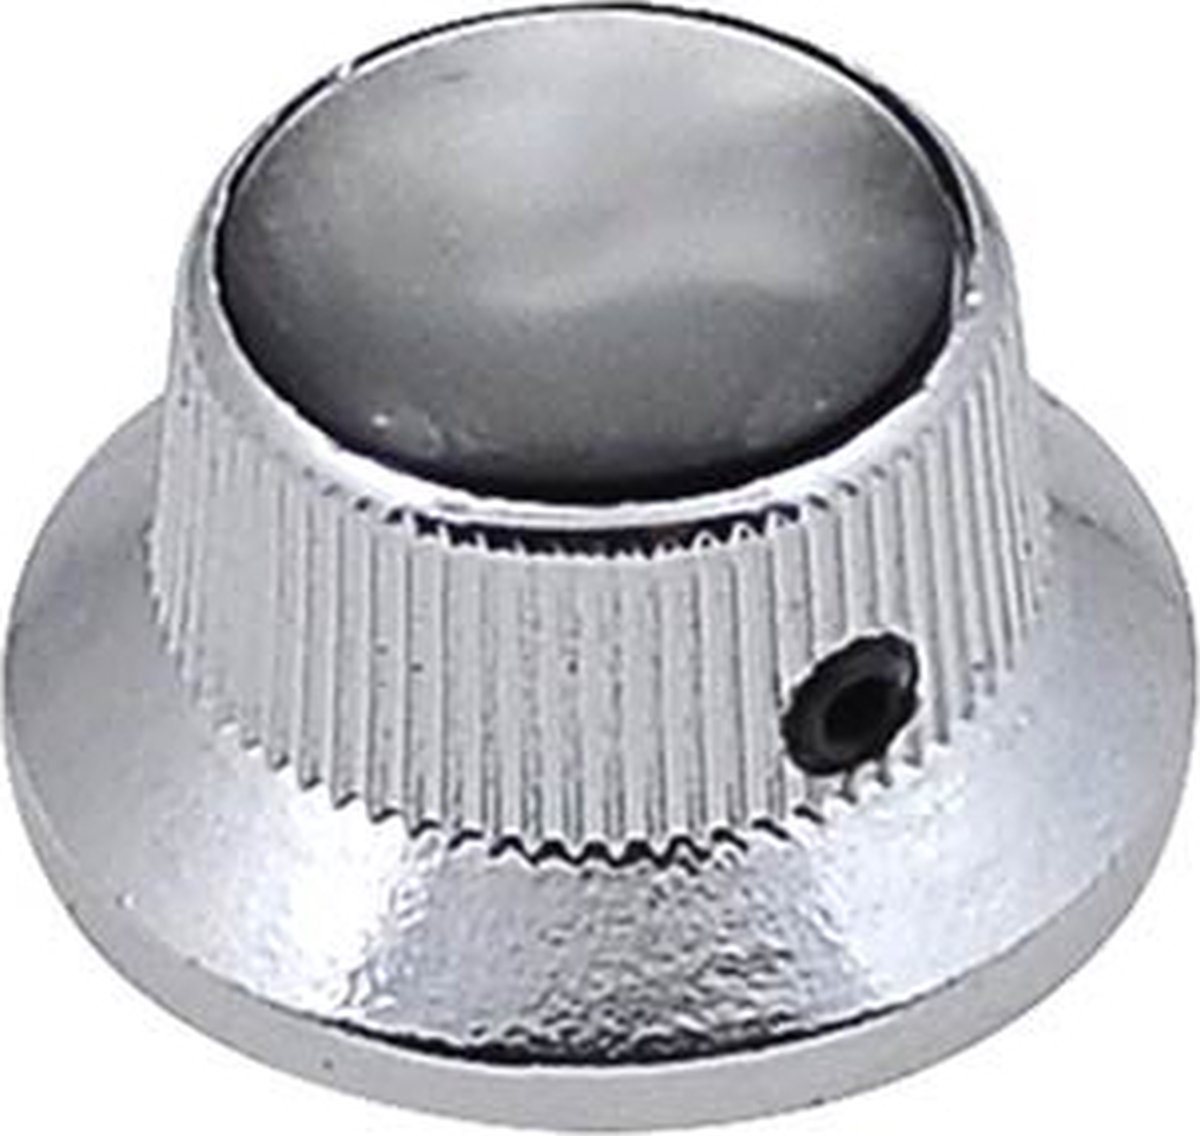 bell knob with black pearl inlay, chrome